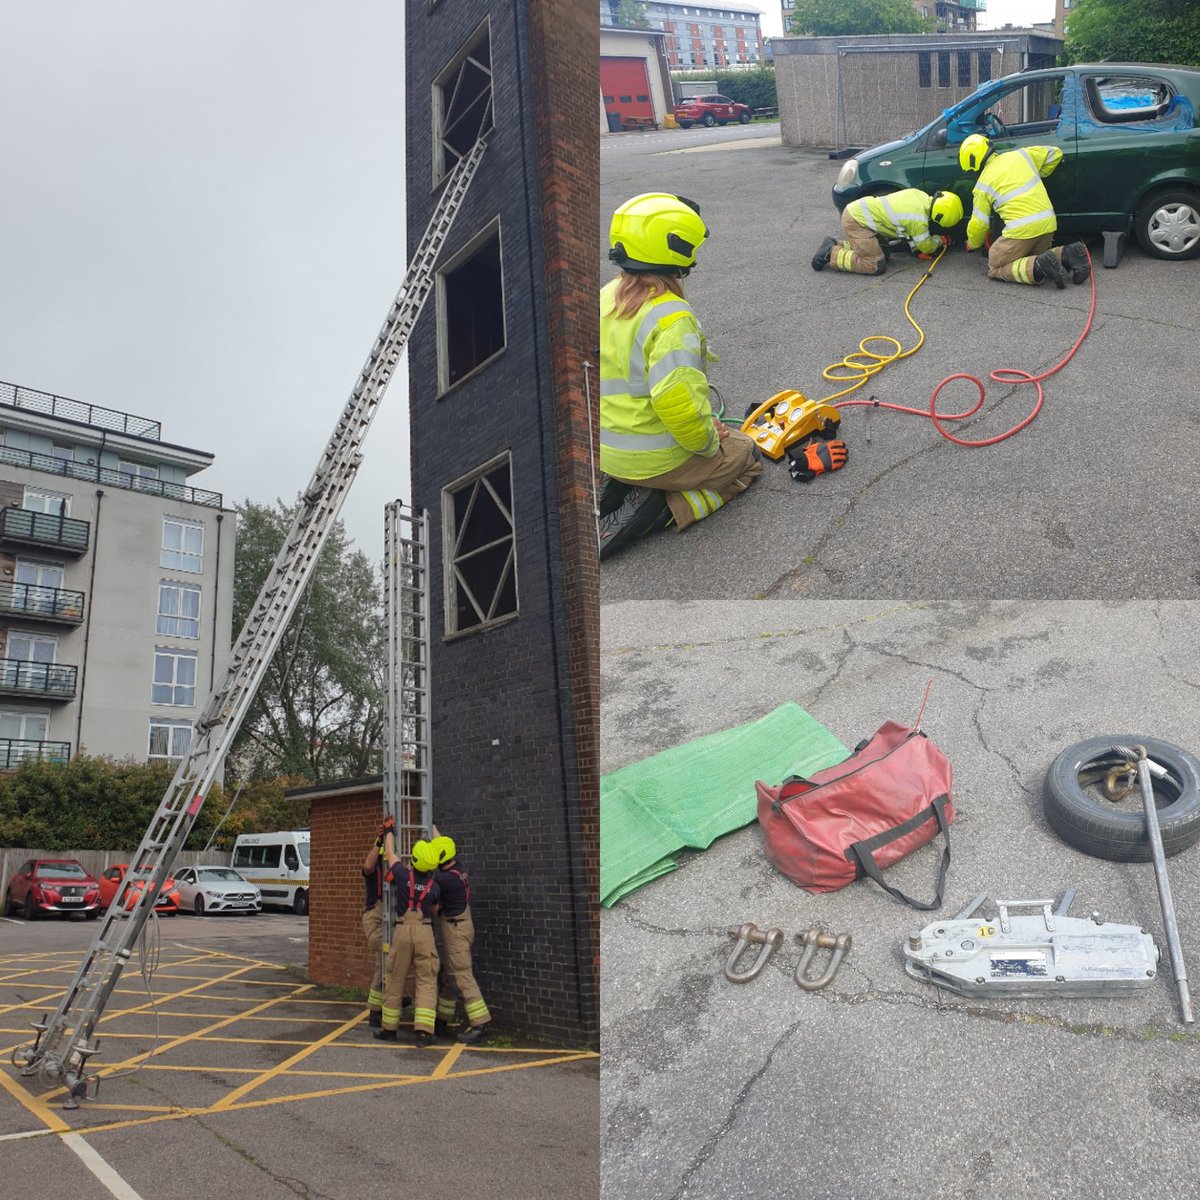 This set saw Green Watch brush up on ladder skills and RTC rescue techniques. It also saw operational incidents, home fire safety visits and business risk based inspections. They'll see you next set for more of the same! #NotJustFires #PreparationIsKey #CommunityFocused